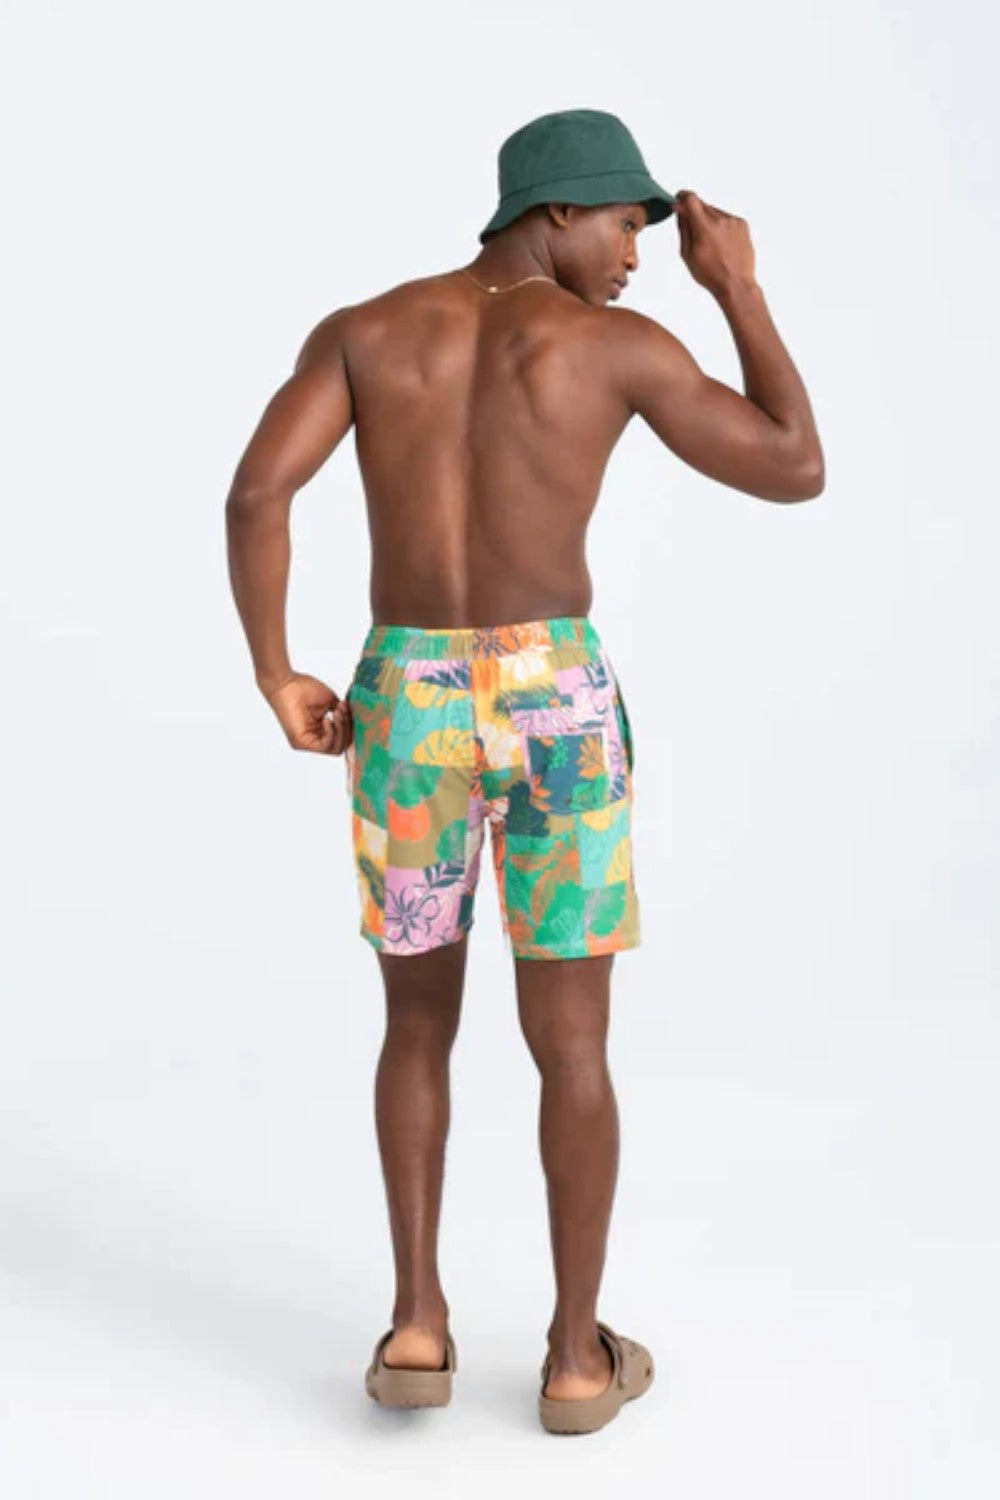 These 2N1 swim shorts combine a Slim Fit liner with an elastic-waist shell. The integrated liner is form-fitting through the butt and thighs.